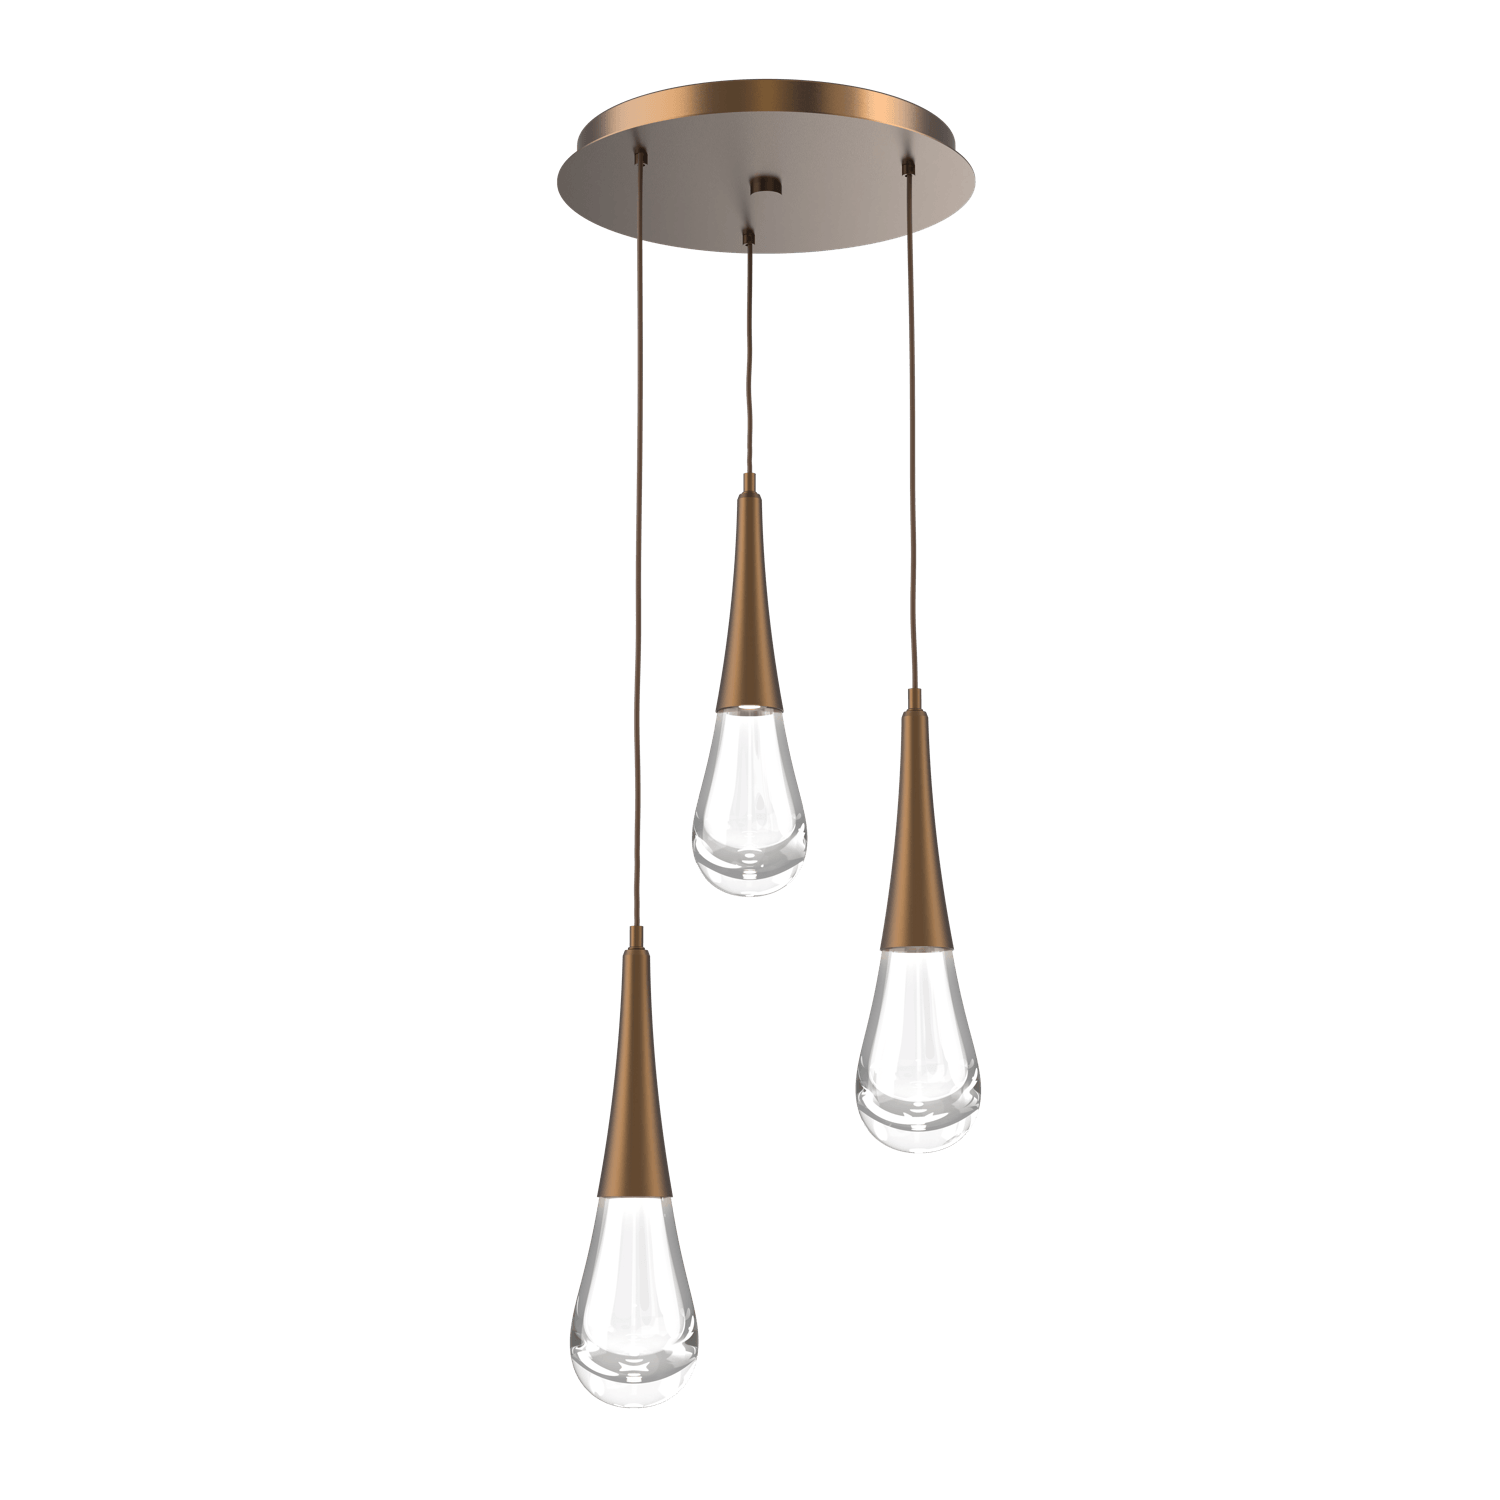 CHB0078-03-FB-Hammerton-Studio-Raindrop-3-light-round-pendant-chandelier-with-flat-bronze-finish-and-clear-blown-glass-shades-and-LED-lamping